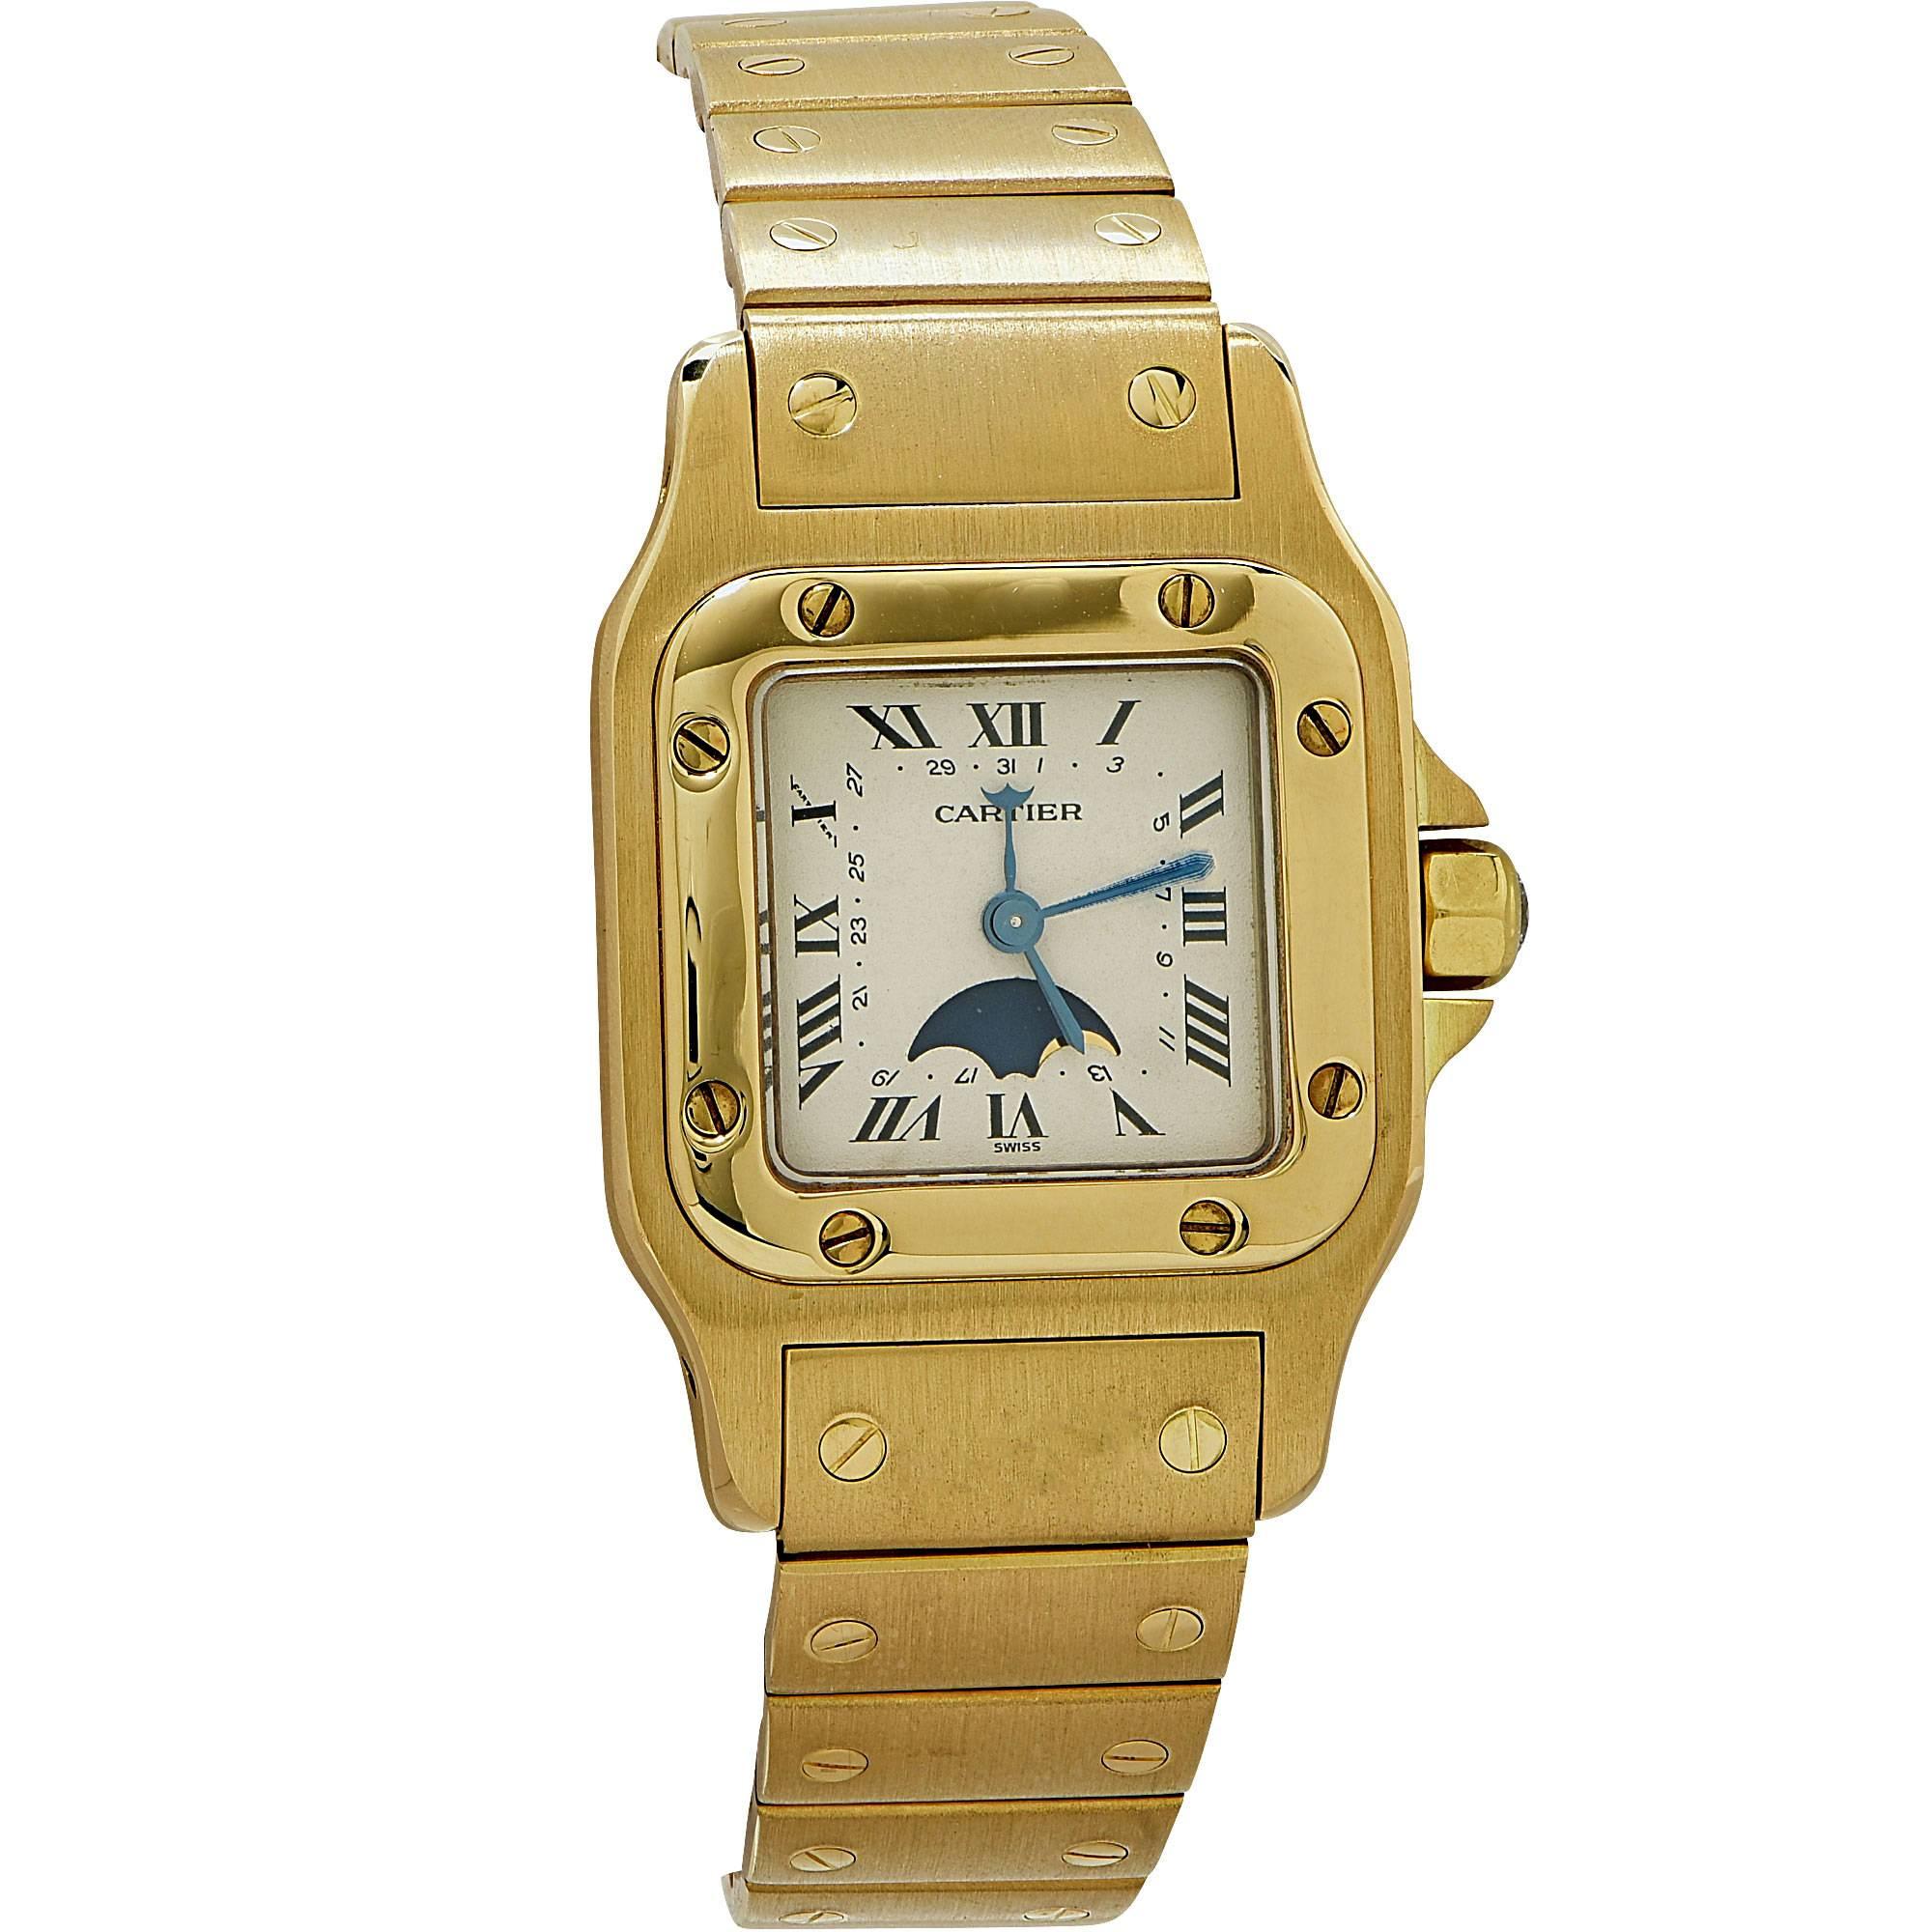 18k yellow gold Cartier Santos watch with original box.

It is stamped and tested as 18k gold.
The metal weight is 85.99 grams.

This Cartier watch is accompanied by a retail appraisal performed by a GIA Graduate Gemologist.